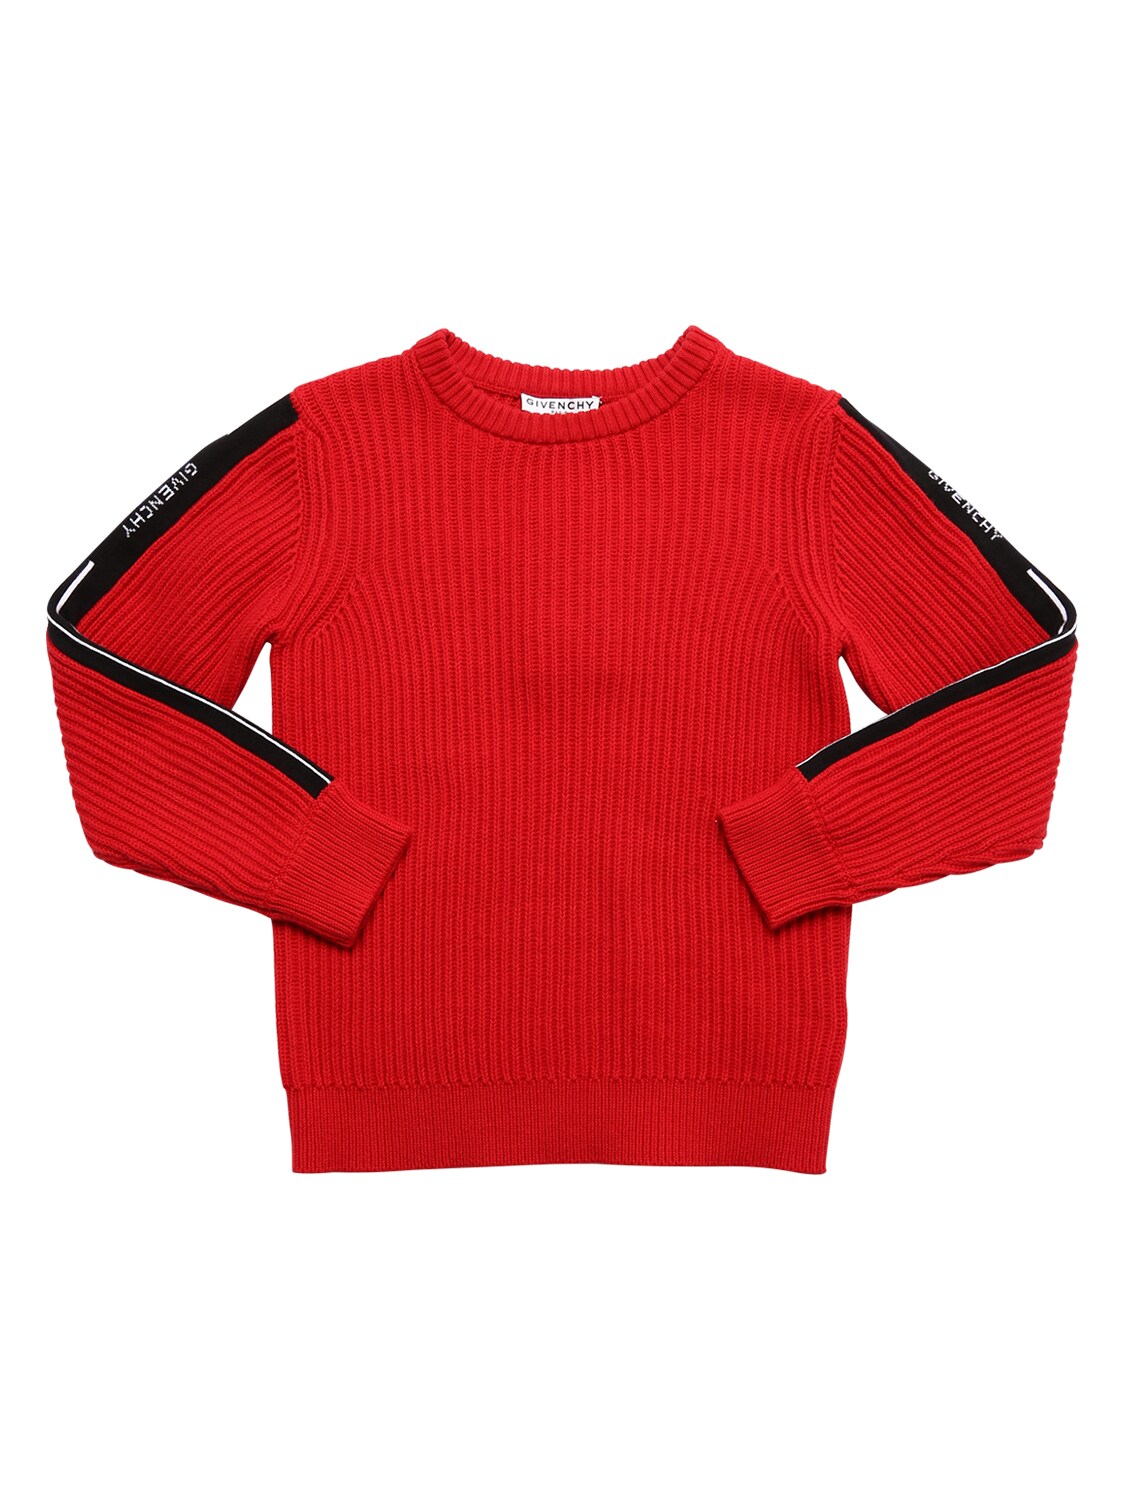 GIVENCHY RIBBED KNIT COTTON & CASHMERE jumper,72IOFL002-OTKX0